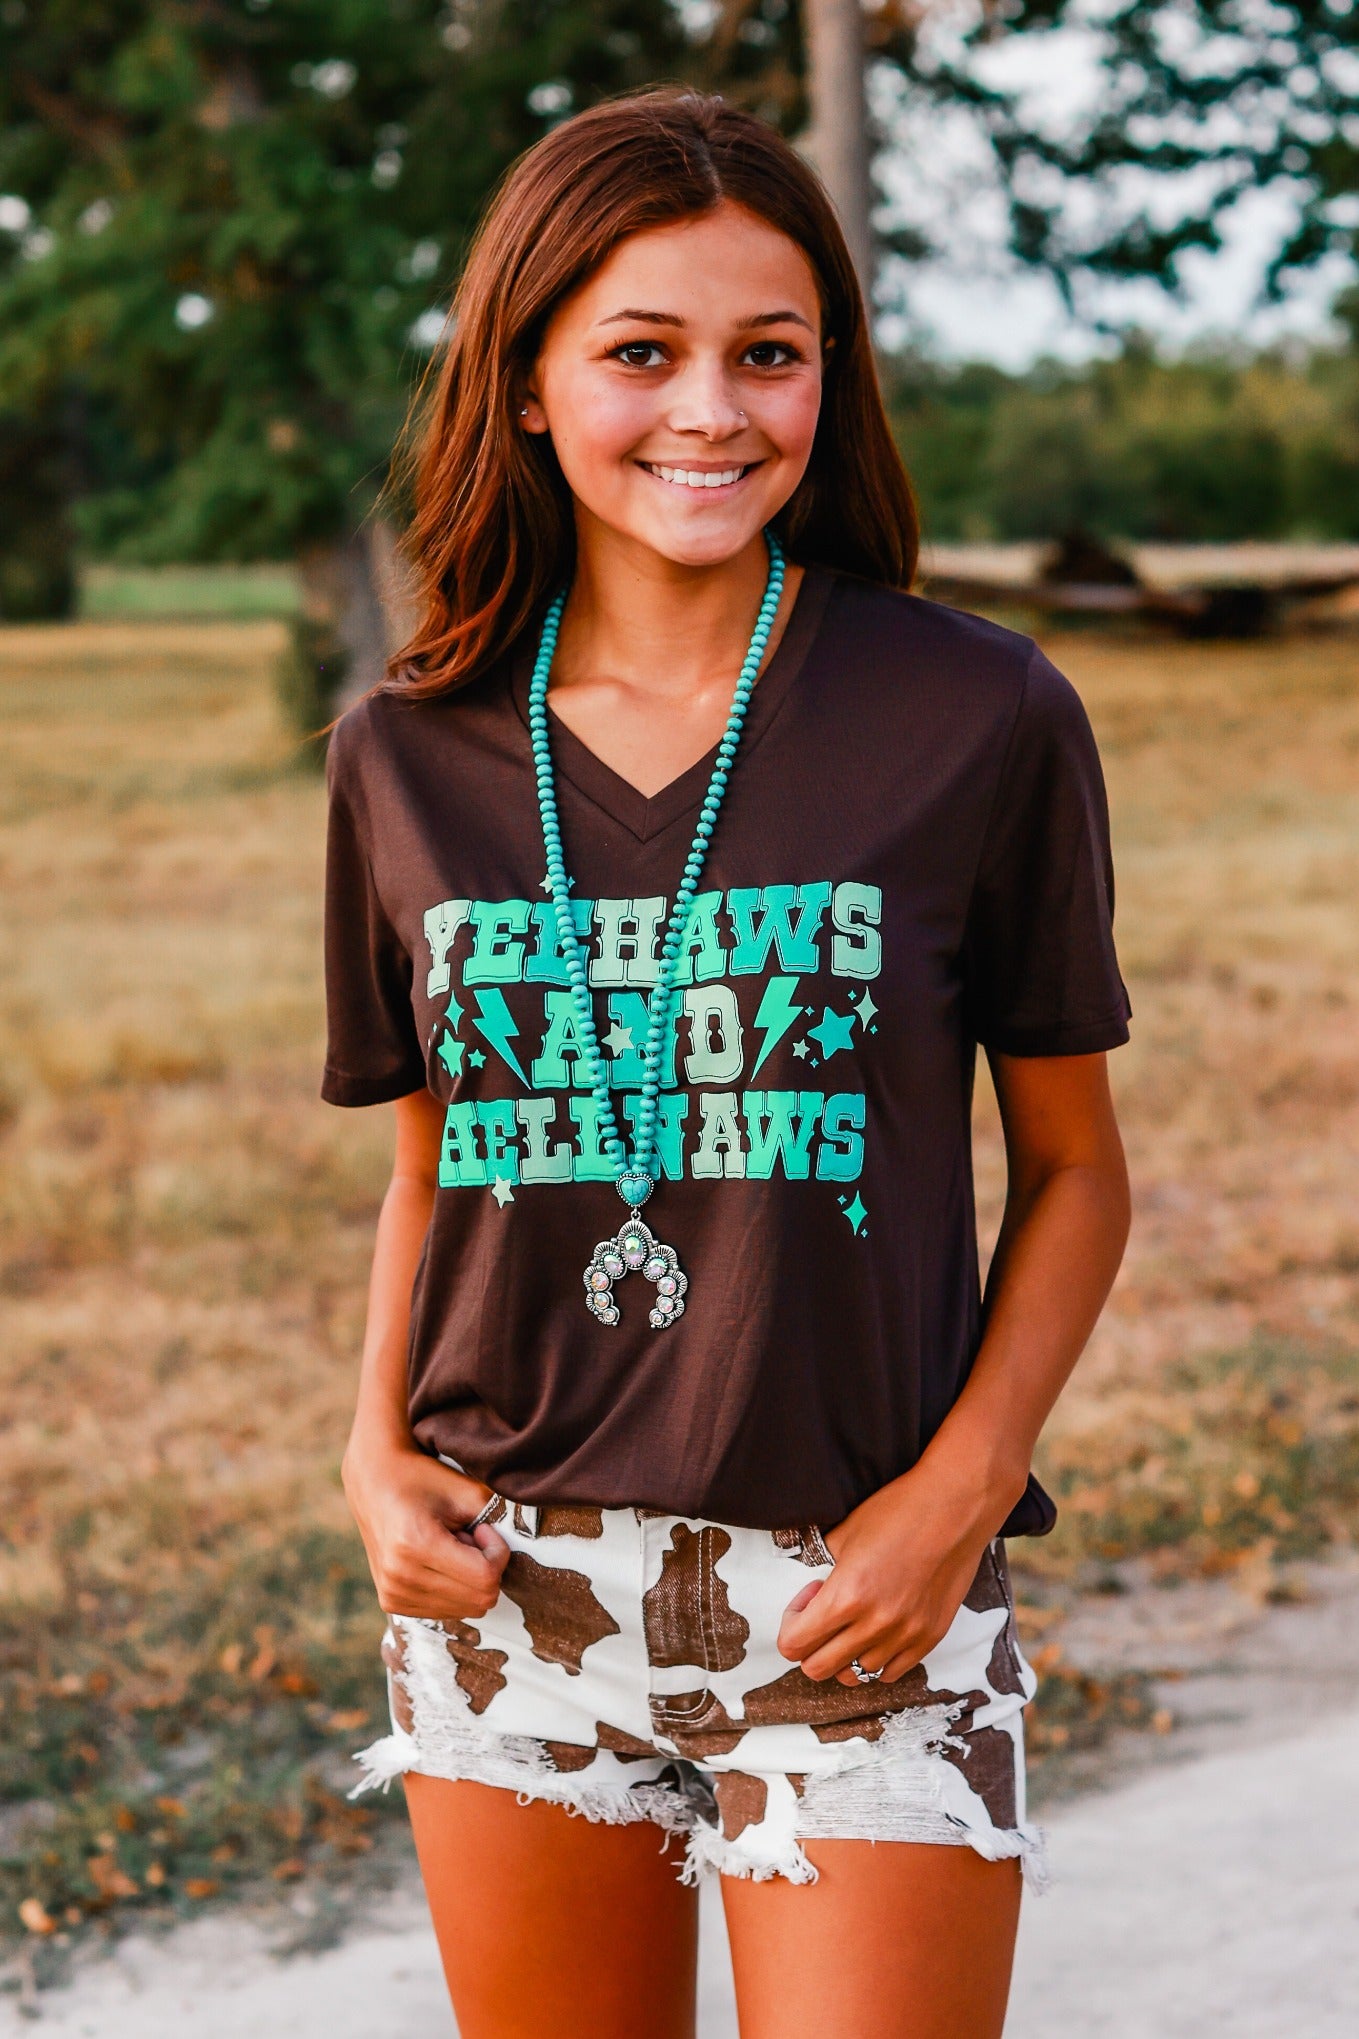 Yee Haw And Hellnaws on Espresso Bean V-Neck Tee